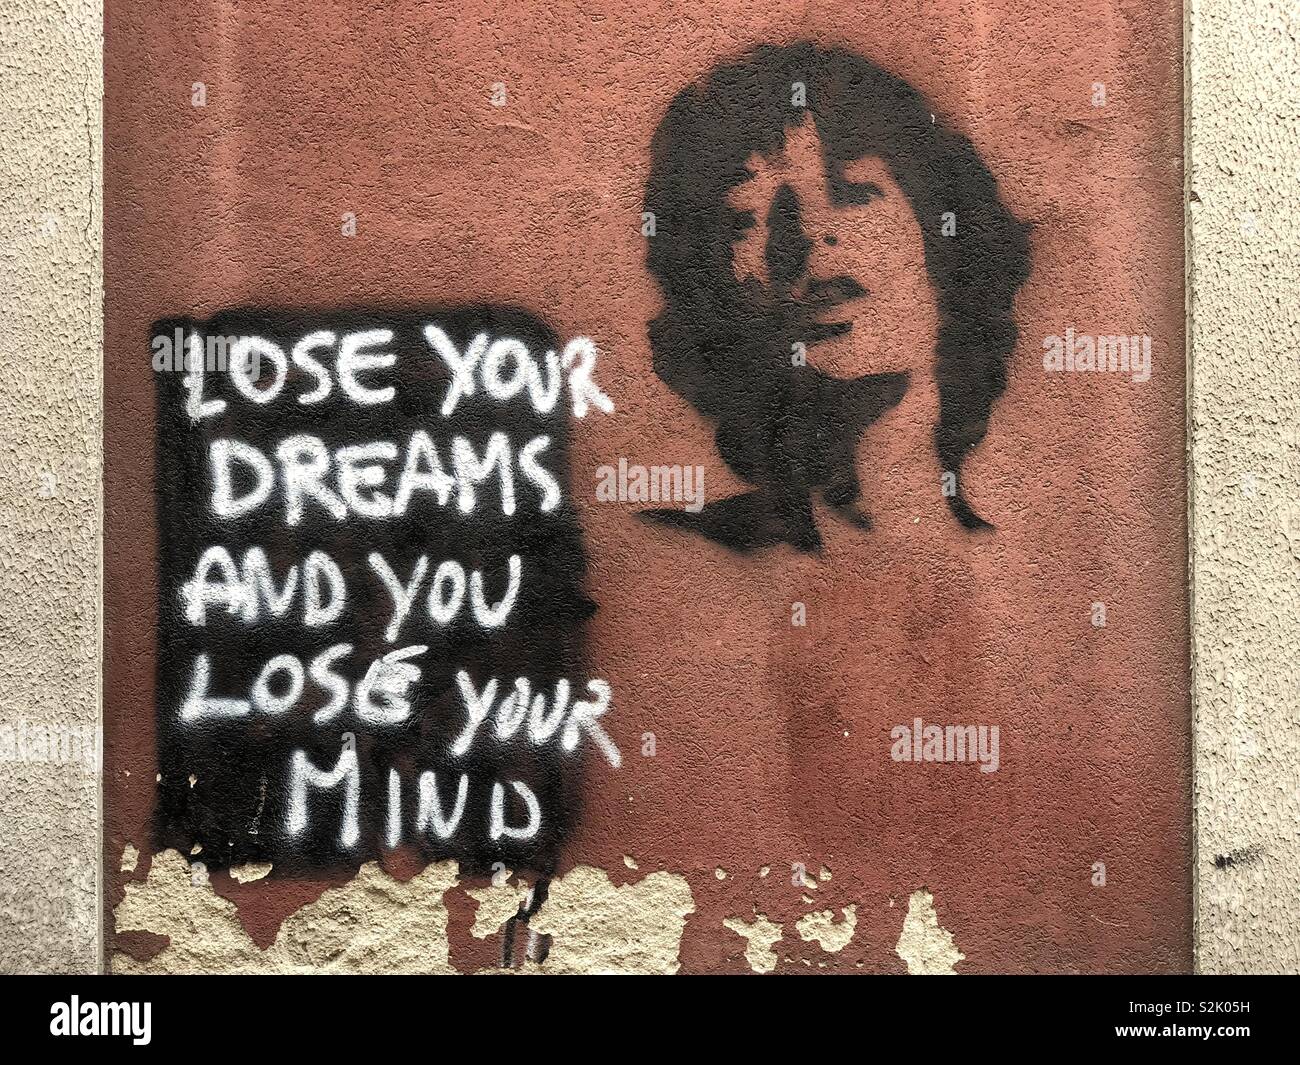 Lose your dreams and you lose your mind Stock Photo